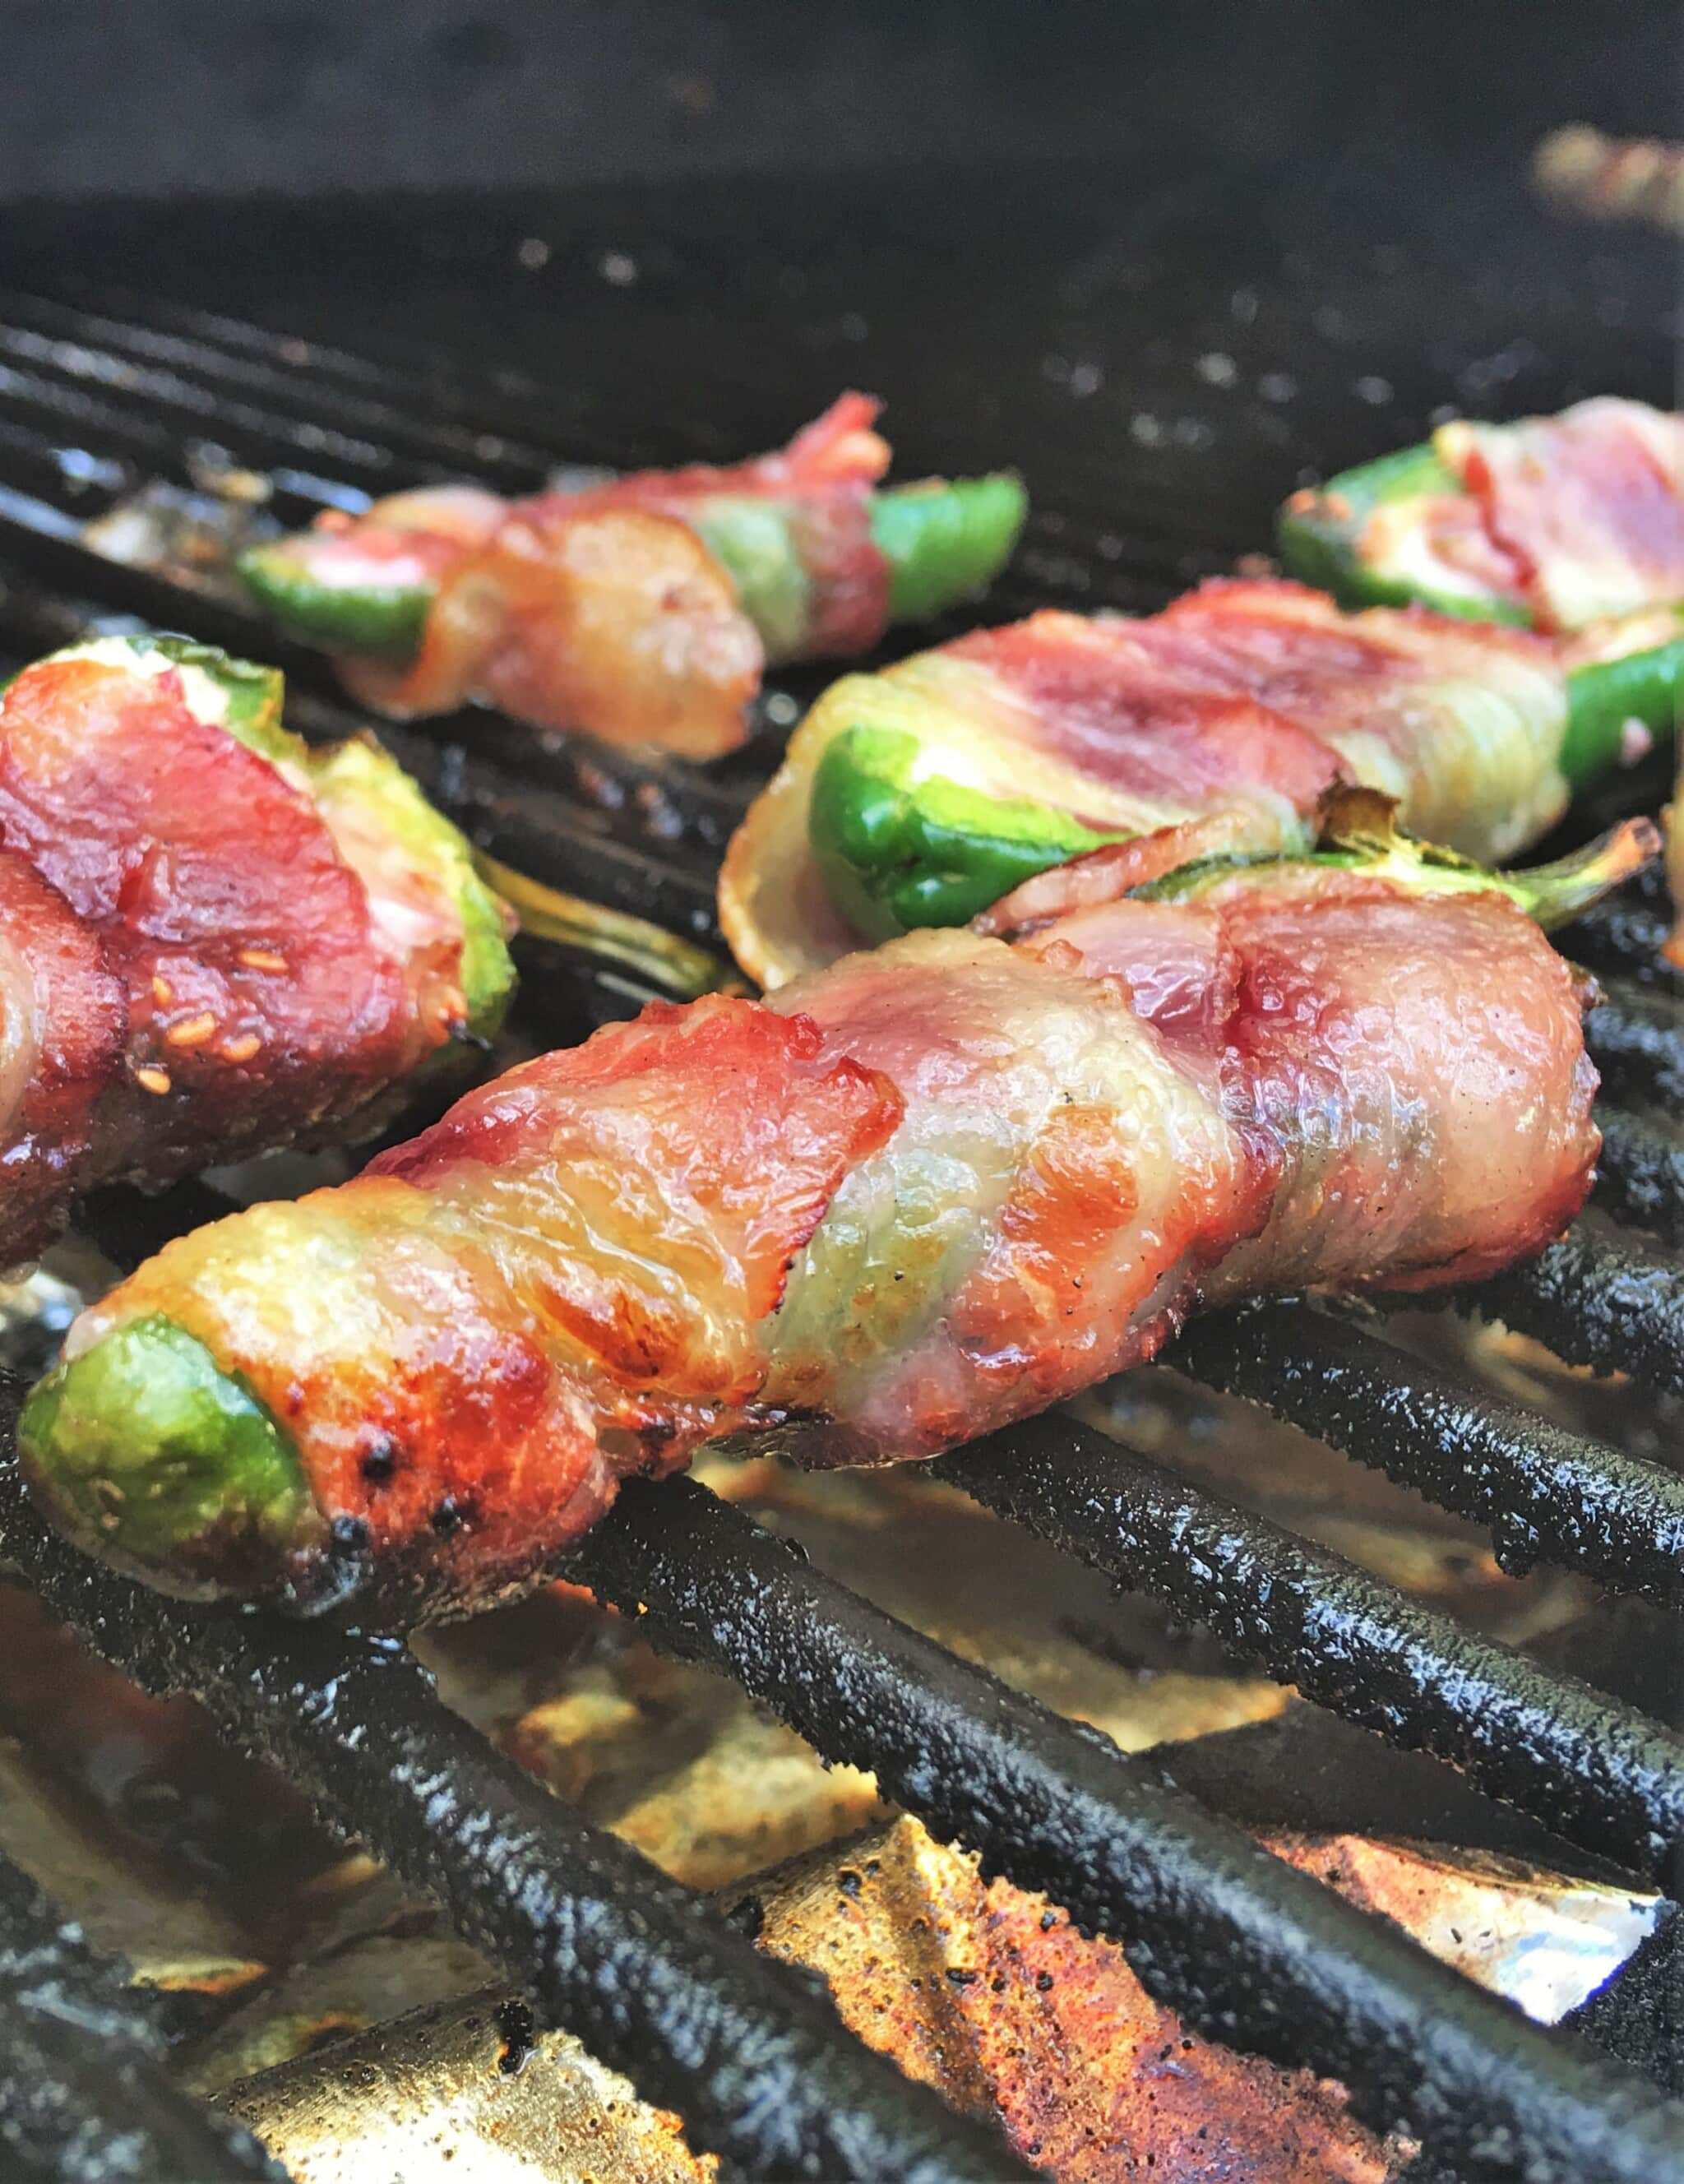 Raspberry Cream Cheese Jalapeno Poppers Hey Grill Hey,How To Blanch Almonds Easily